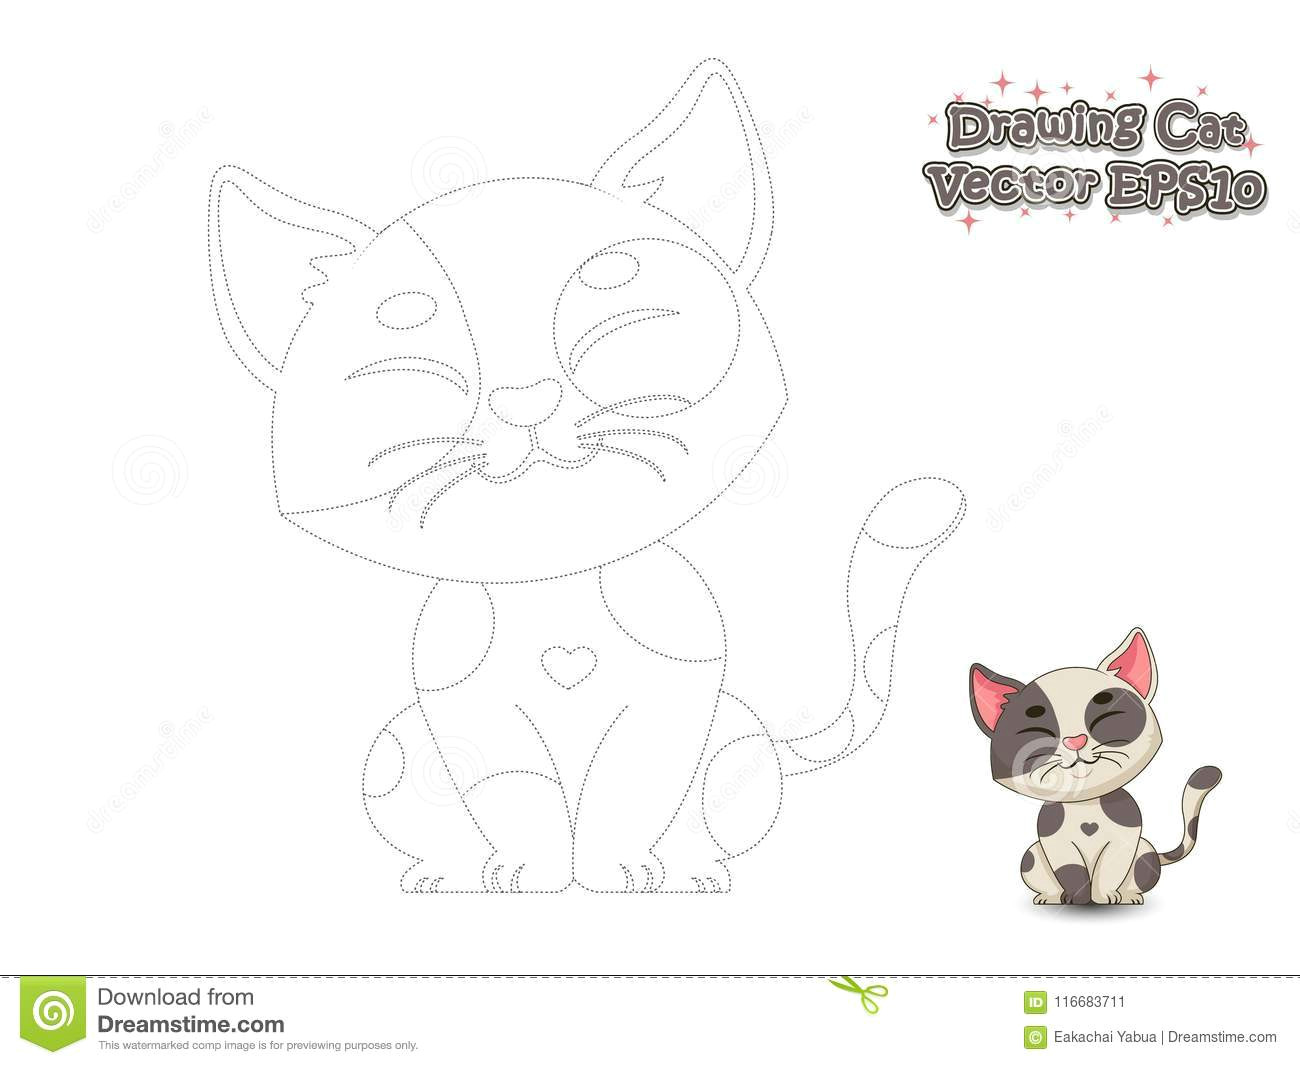 Drawing Anime Cats Drawing and Paint Cute Cartoon Cat Educational Game for Kids V